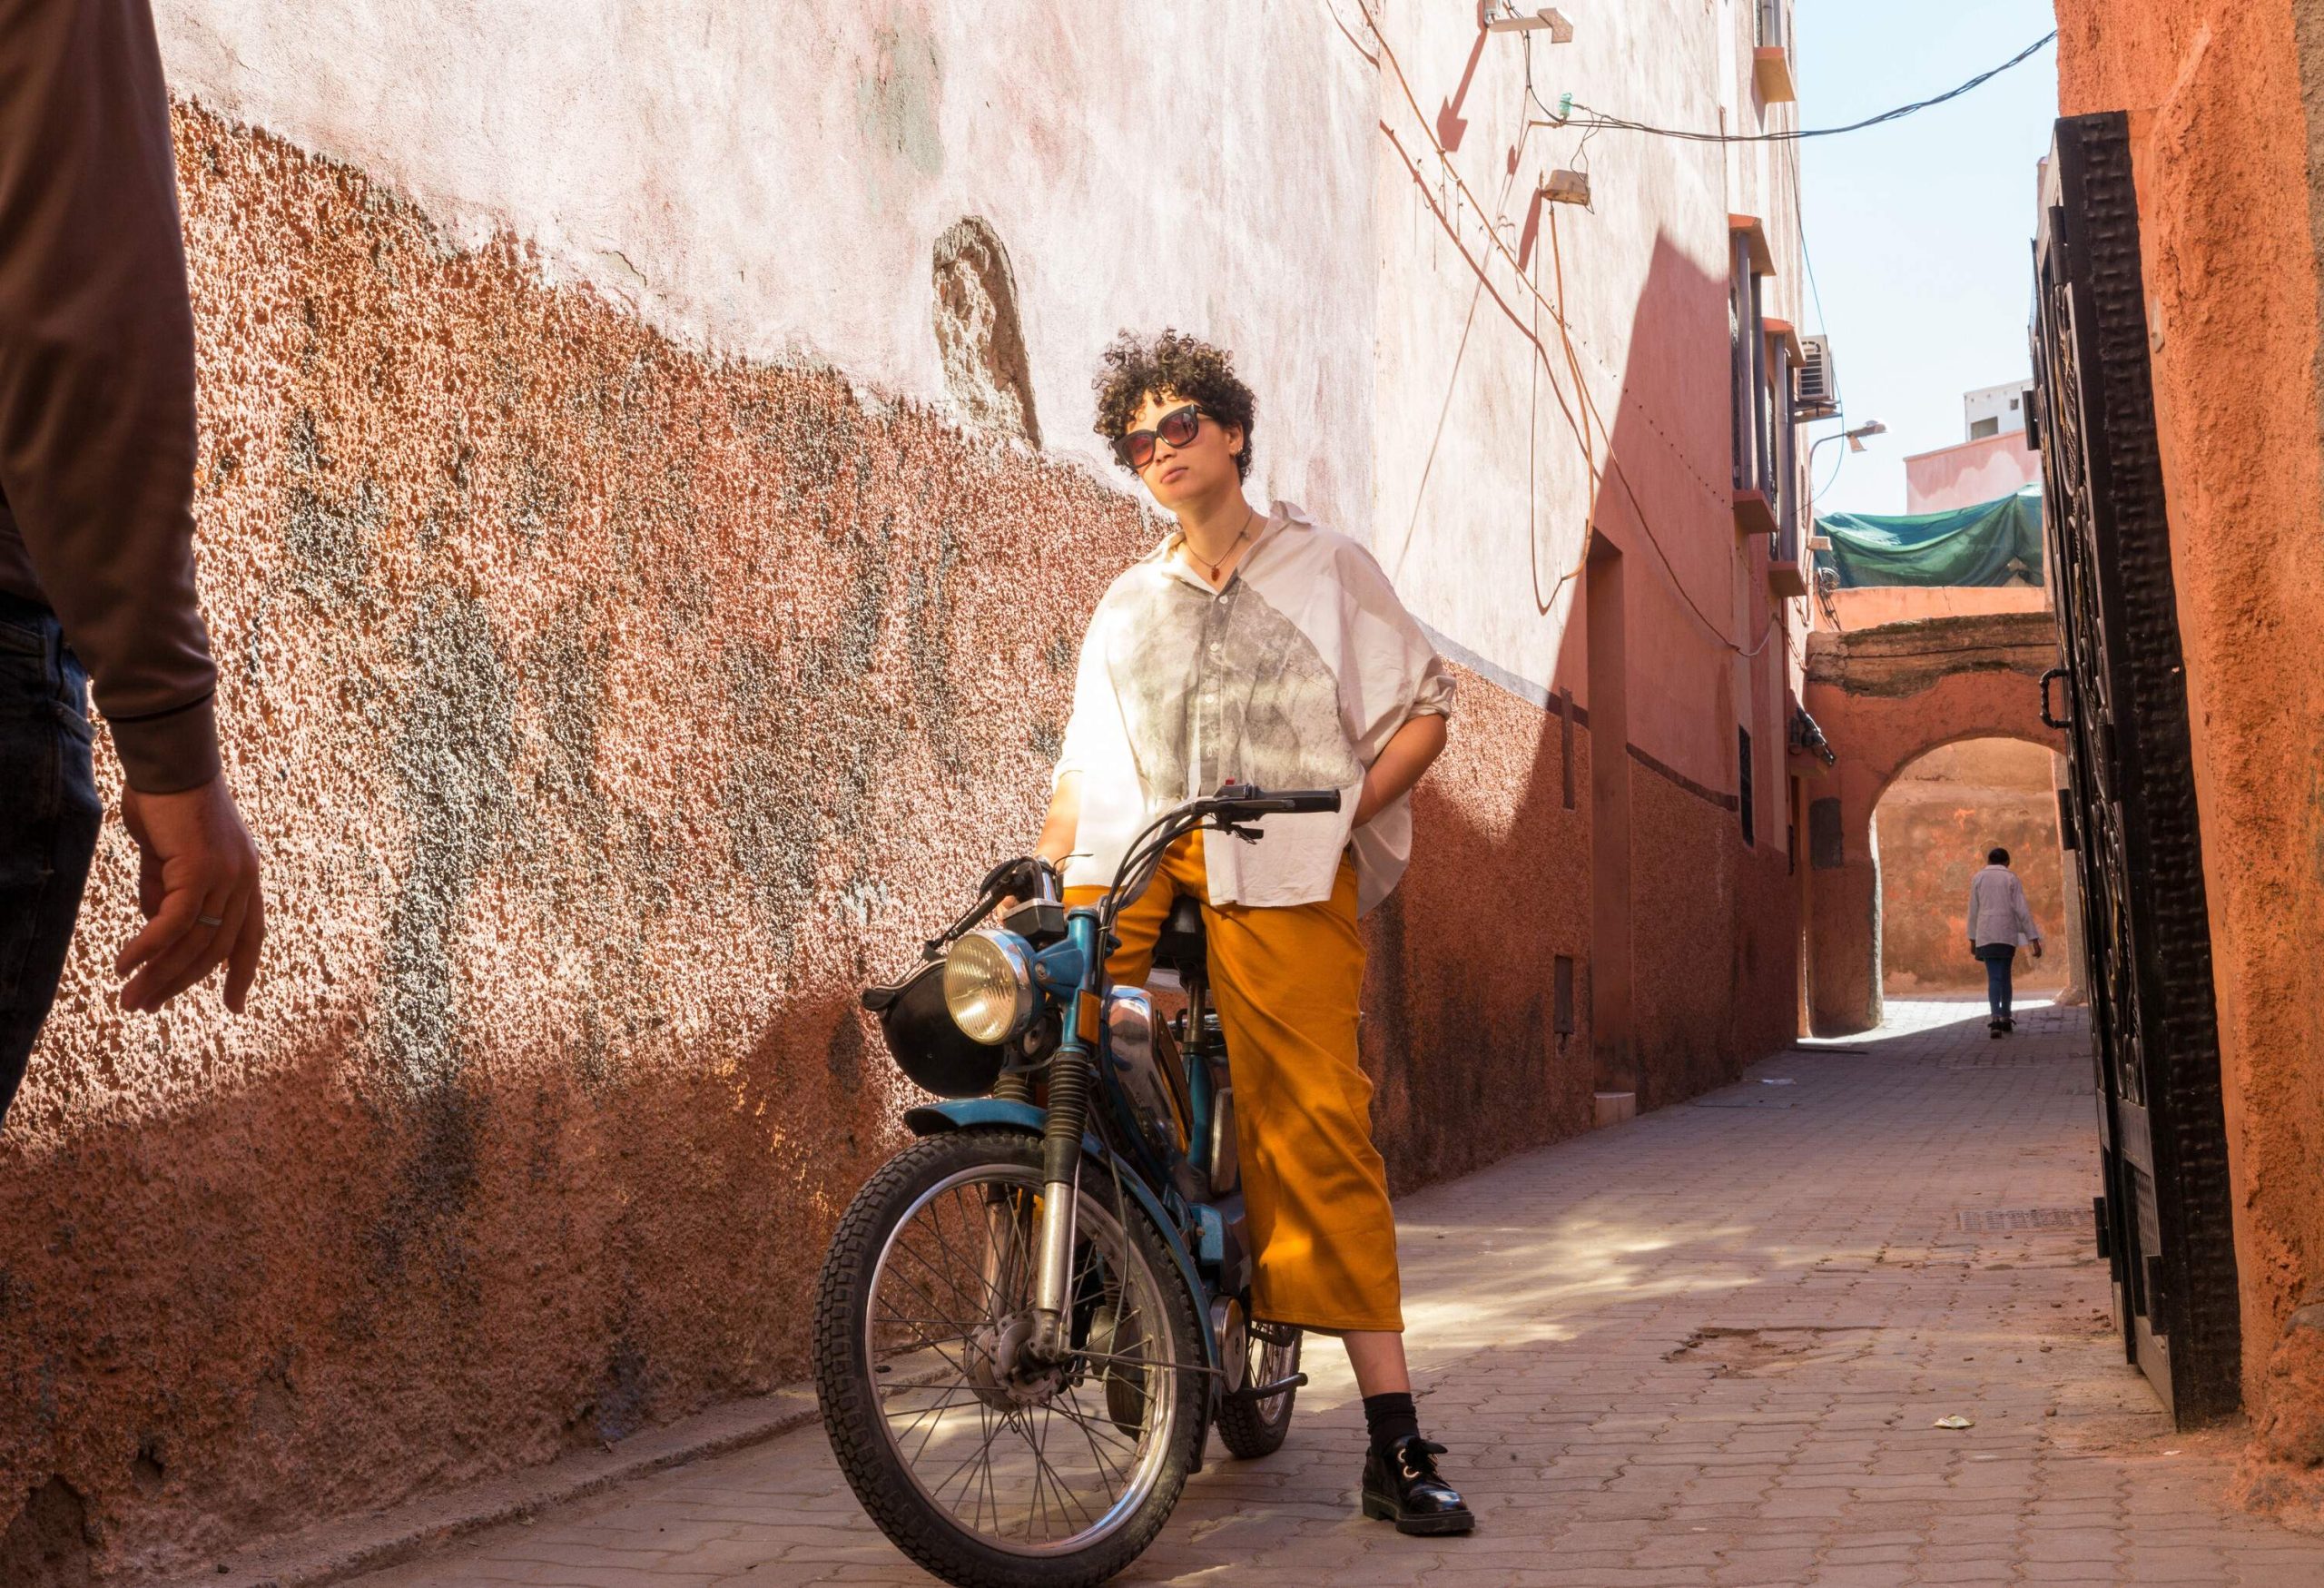 A short, curly-haired lady poses in a blue motorcycle on a cobbled alleyway.